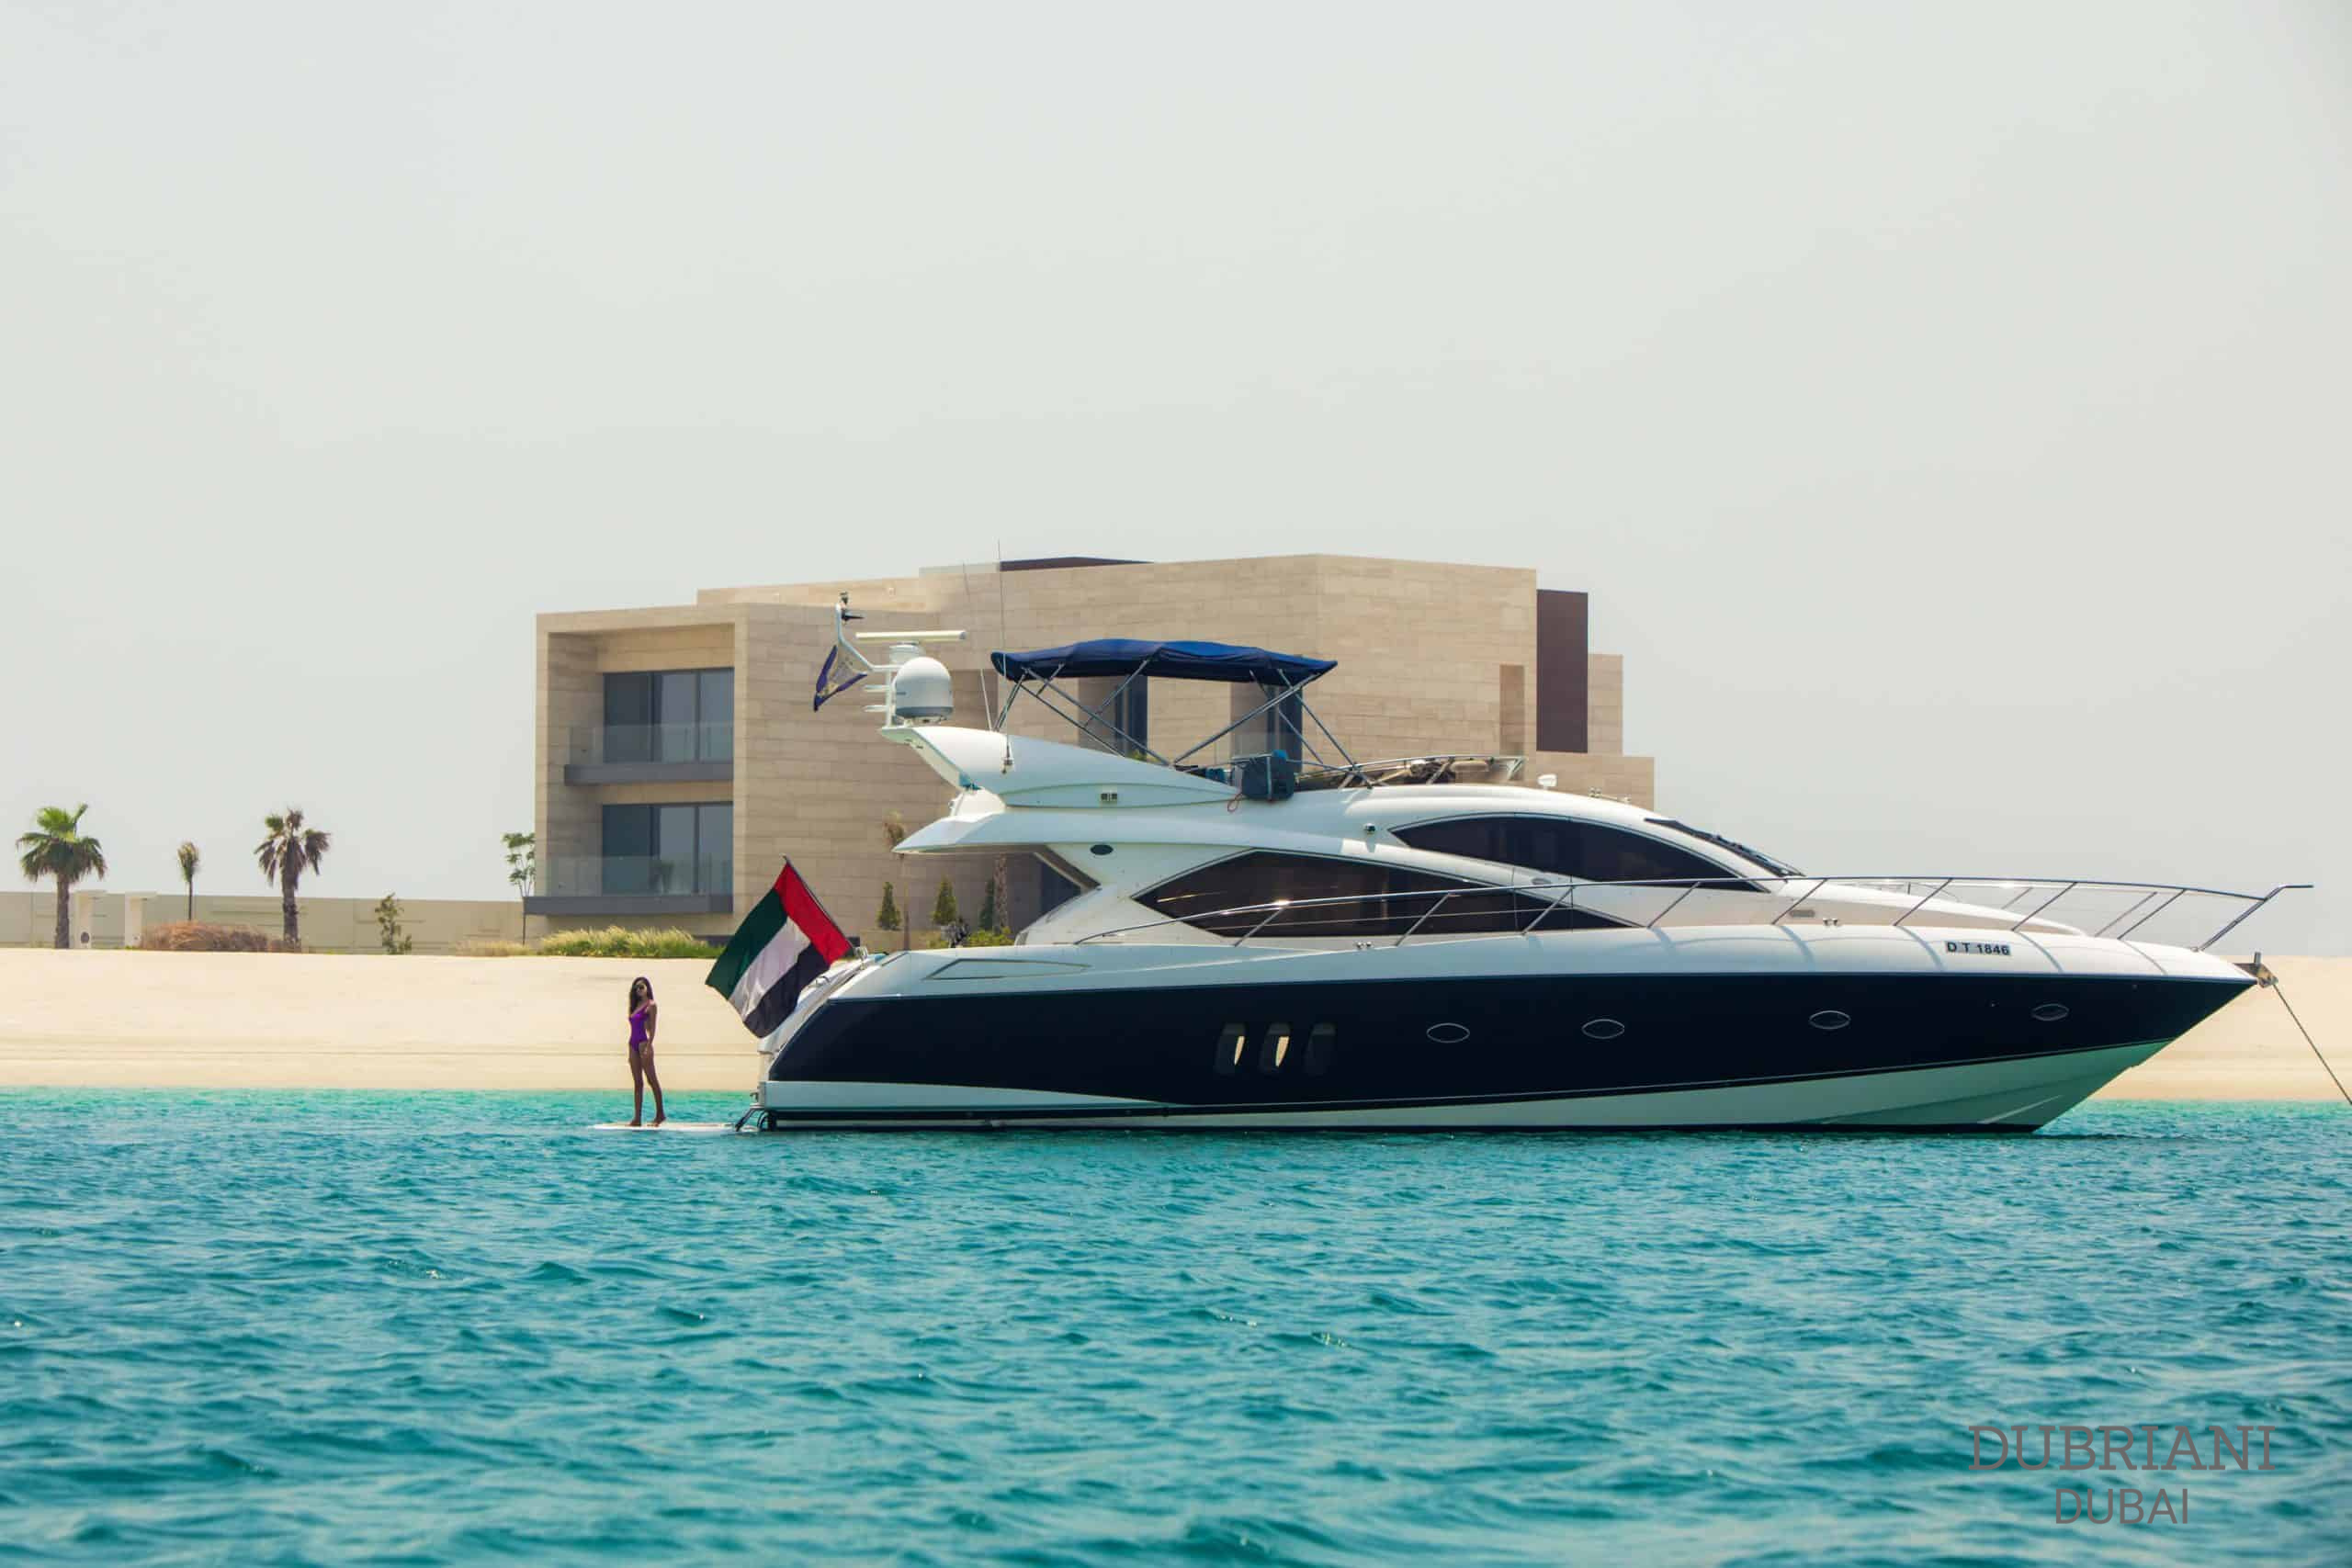 Dubai Yacht Rental - Boat rentals and Yacht Charters in